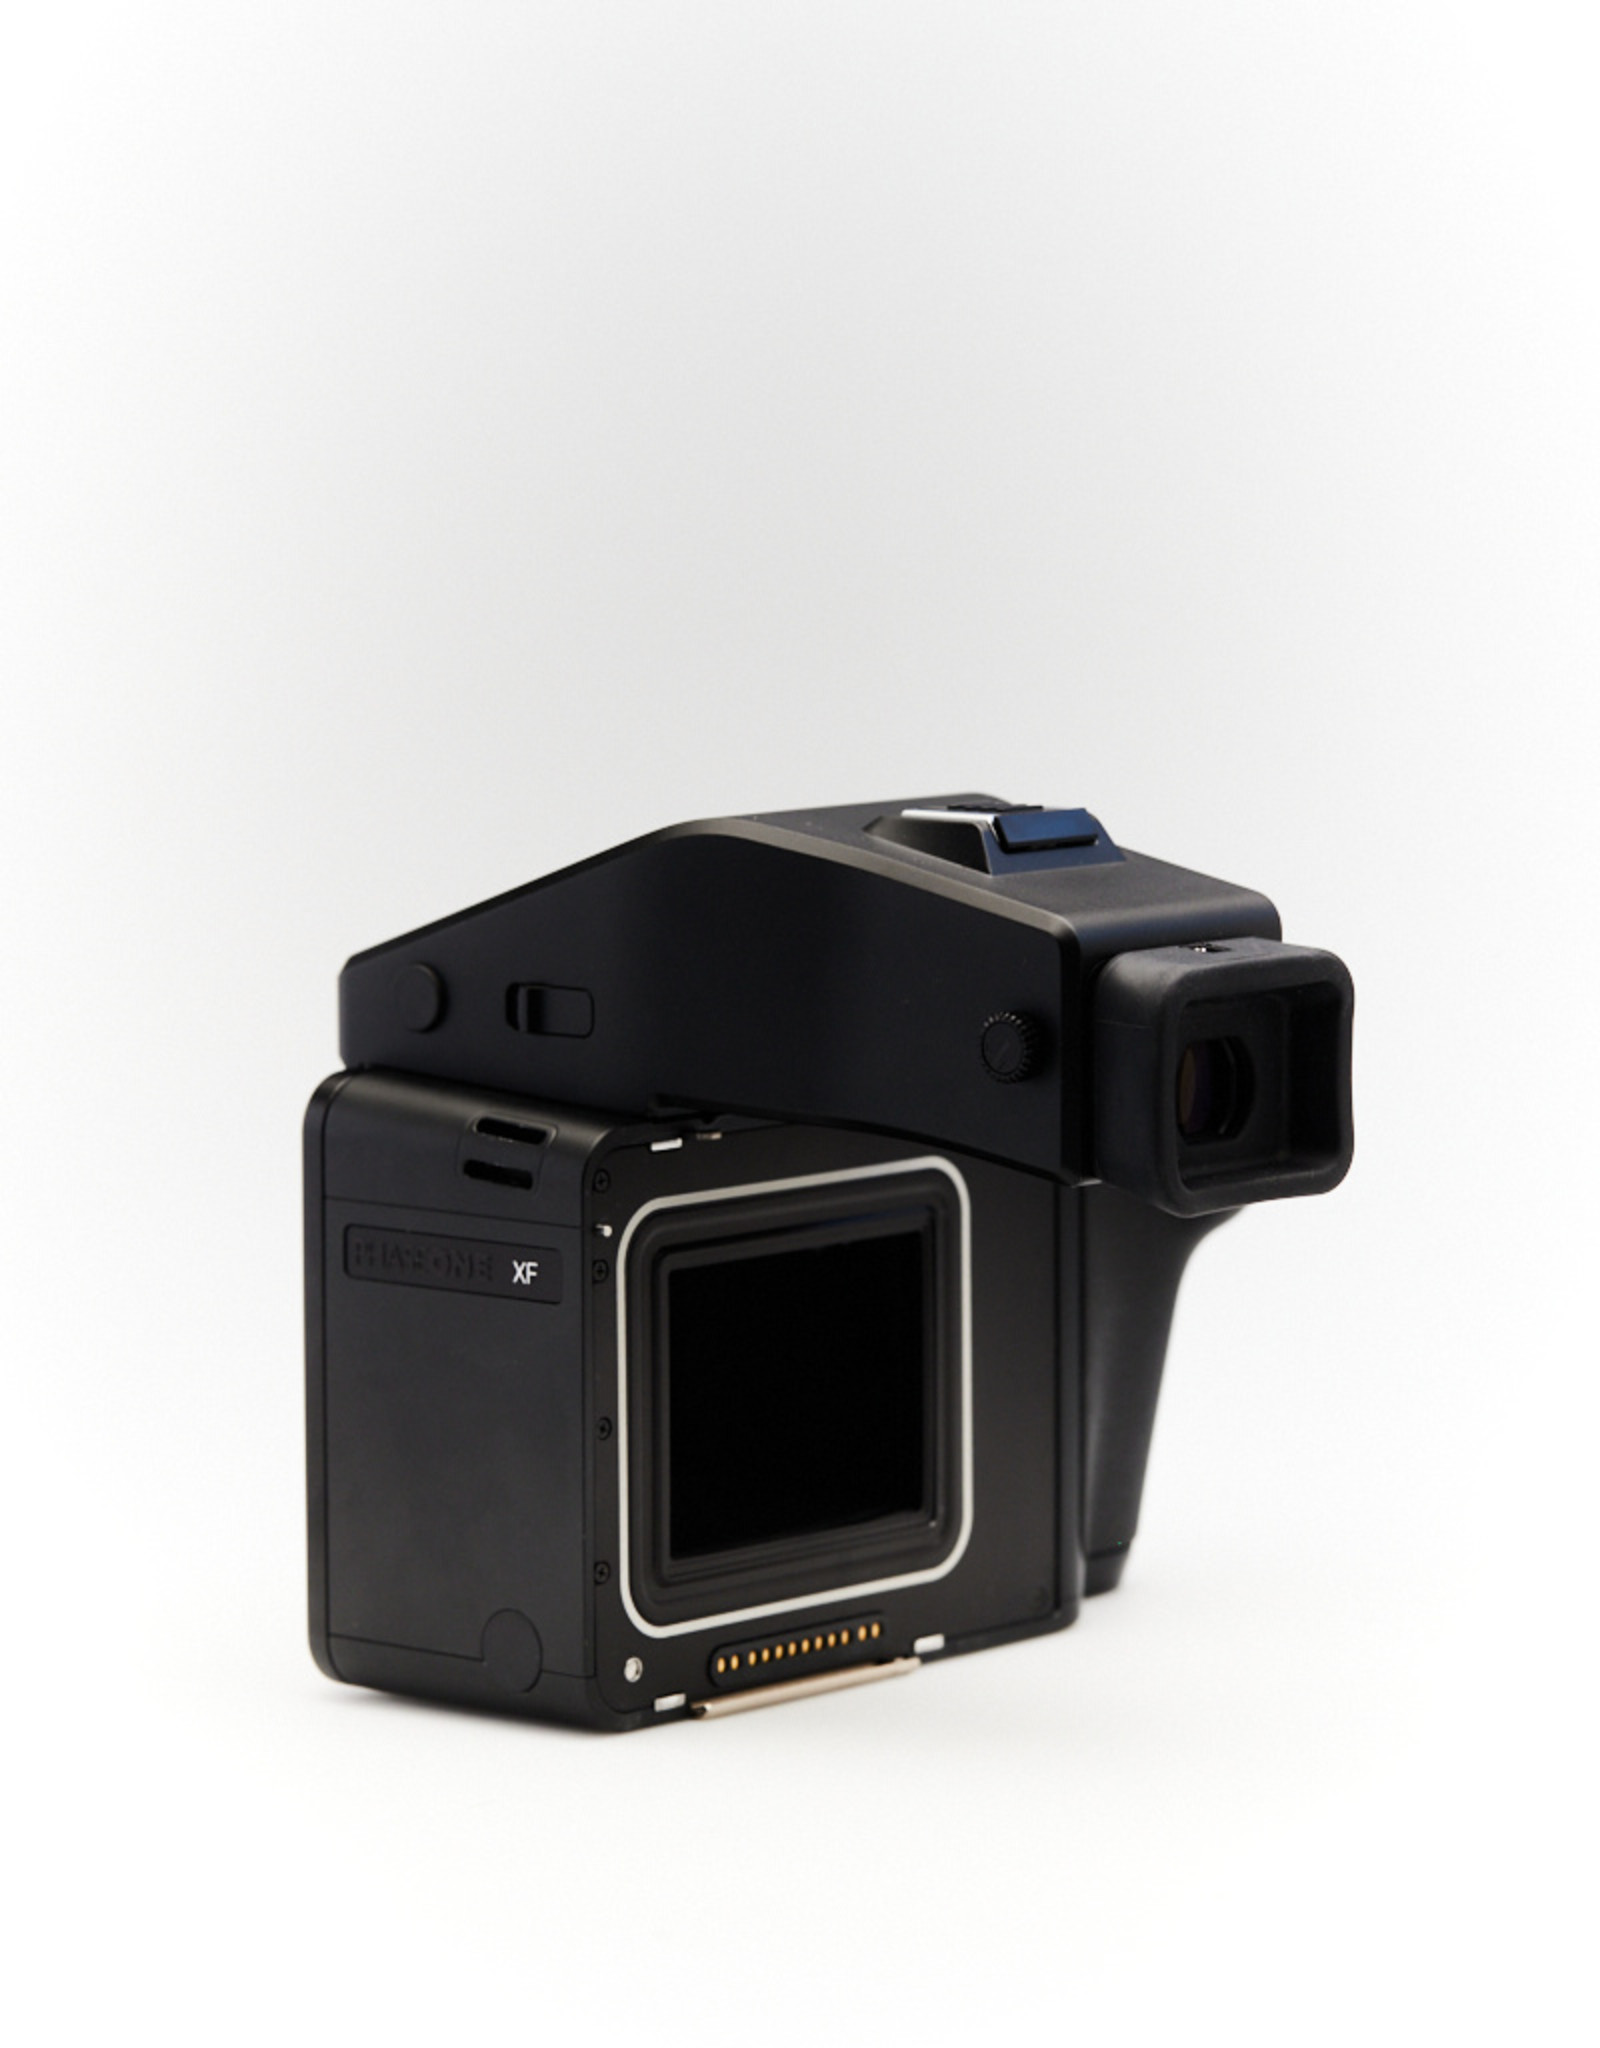 Phase One Phase One XF Camera Body with Prism Viewfinder, comes with a 1 Year Warranty